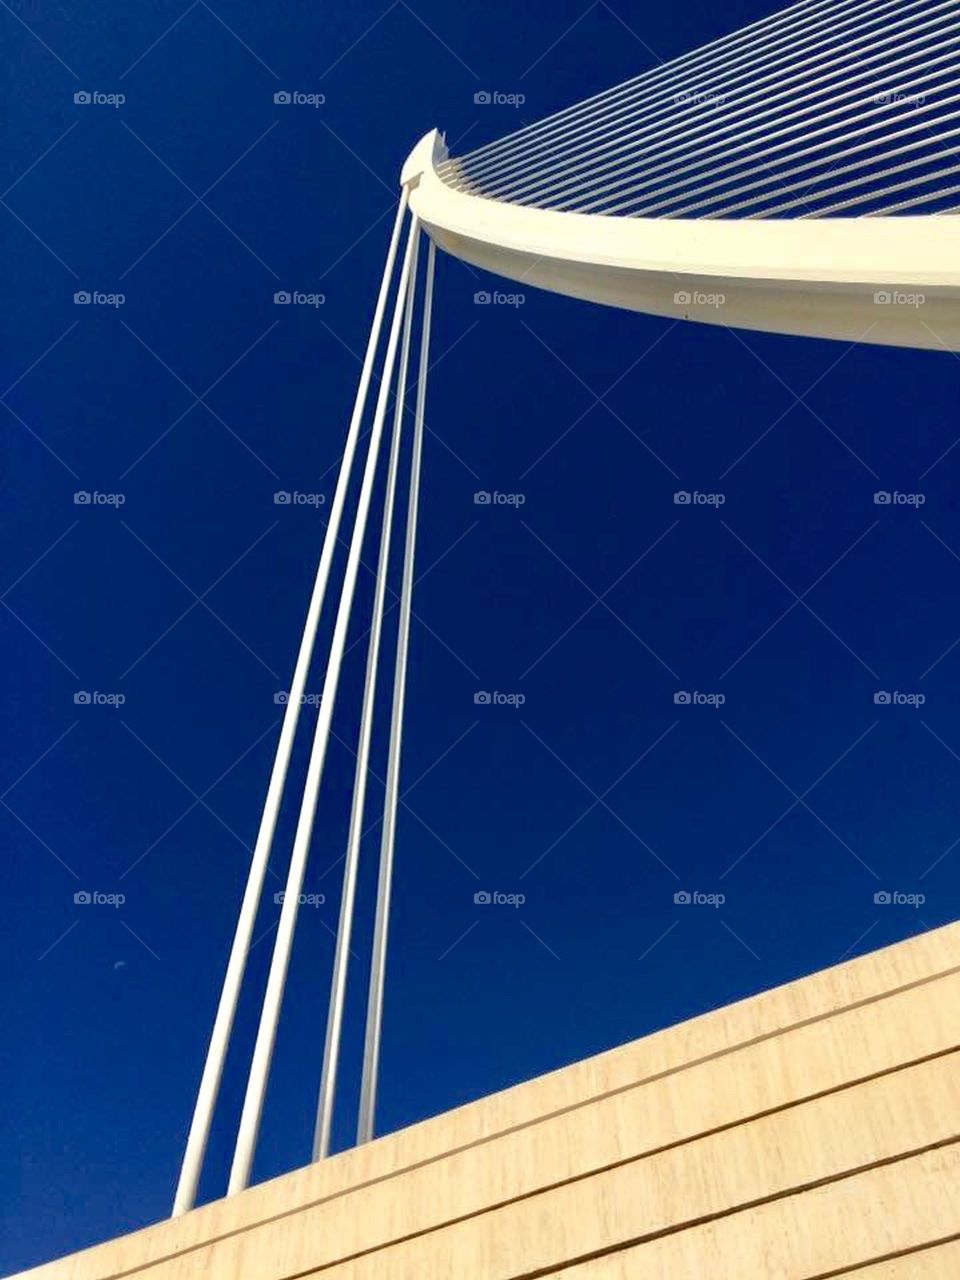 Detail from the structure at the City of Arts and Science in Valencia, Spain showing deep blue clear sky against a striking contrast of the white steel.